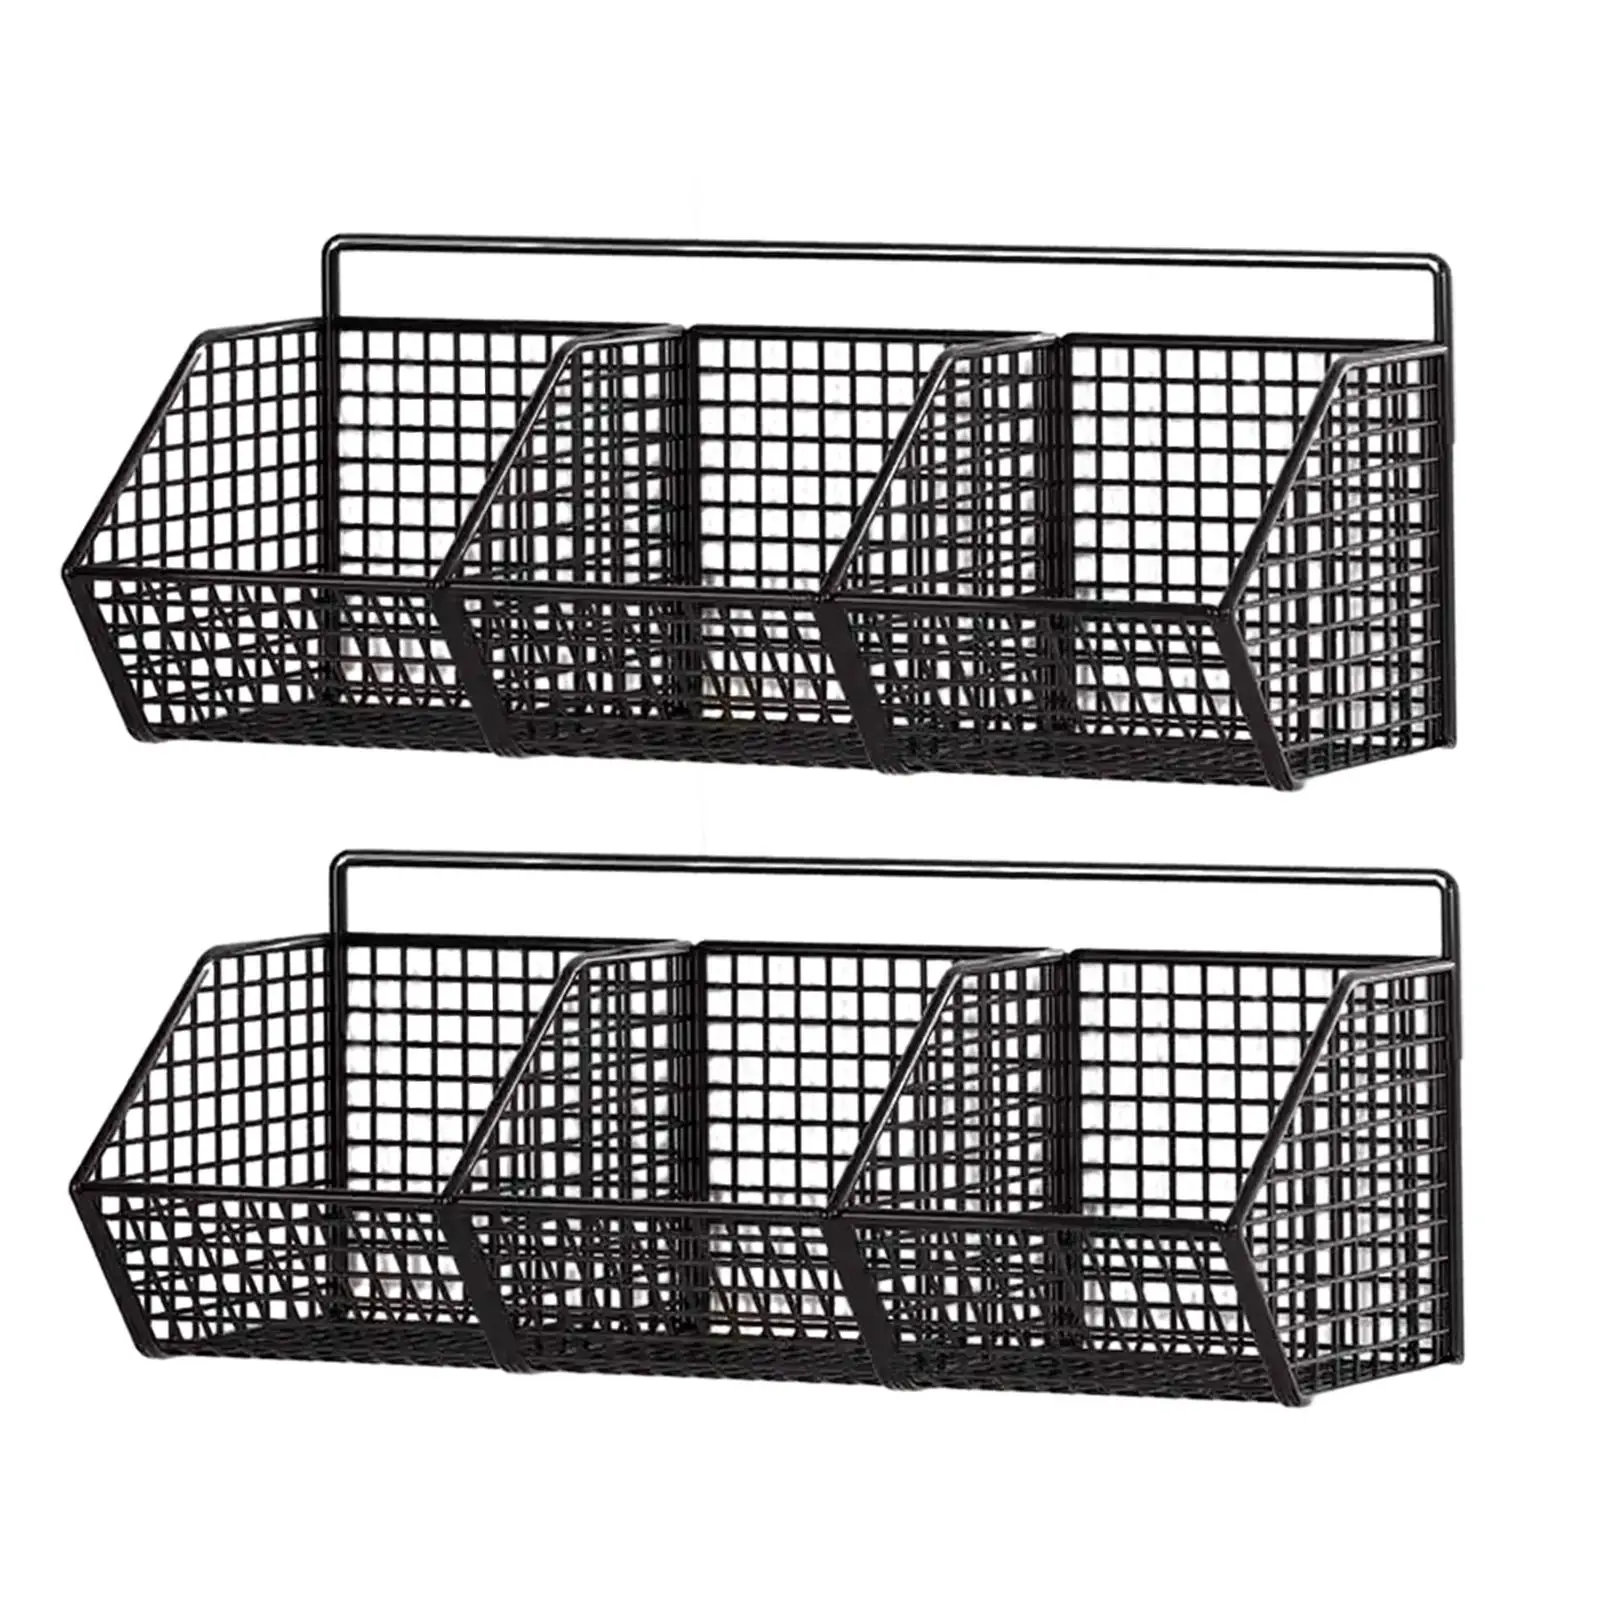 2x Heavy Duty 3 Grids Wall Mounted Shelves Cabinet Storage Basket for Bathroom Fruits Vegetables Snacks Craft Room Kitchen